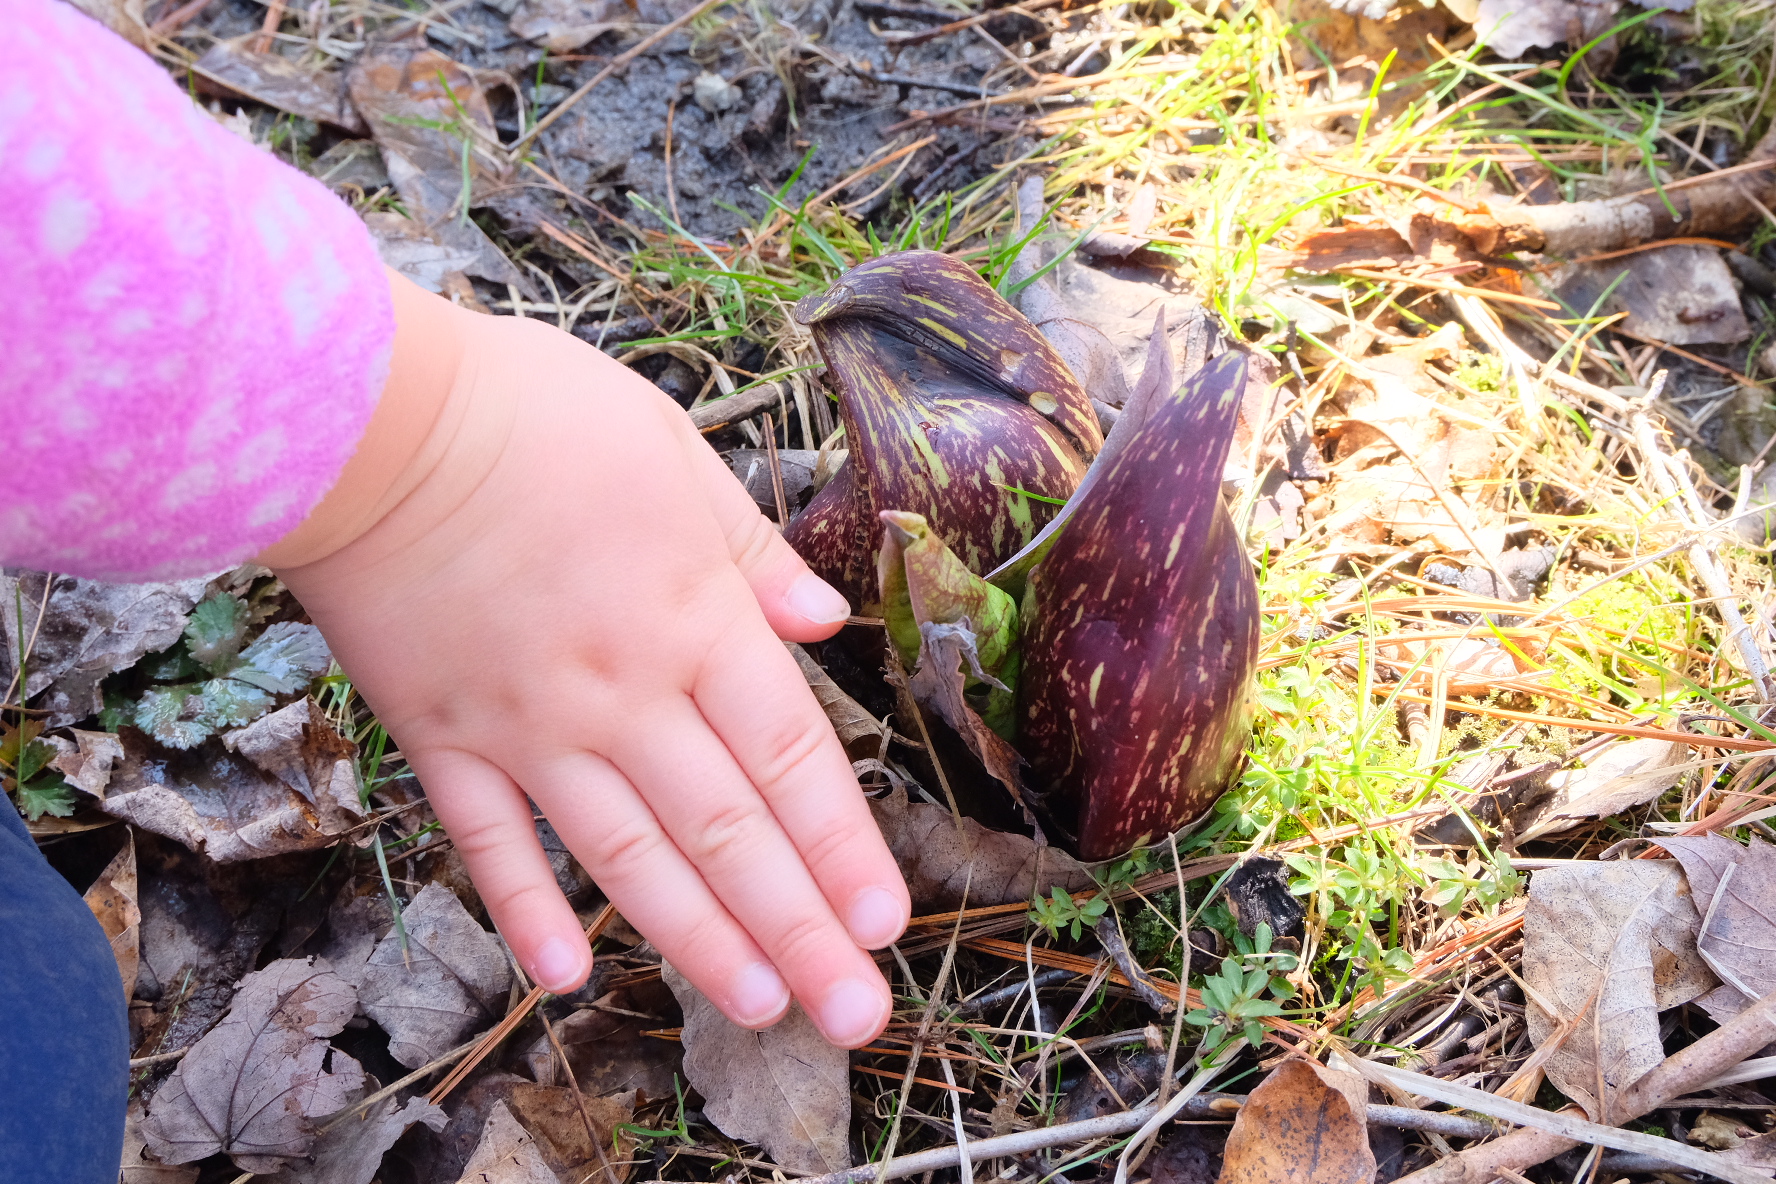 A Skunk Cabbage The Size of Phoebe's Hand